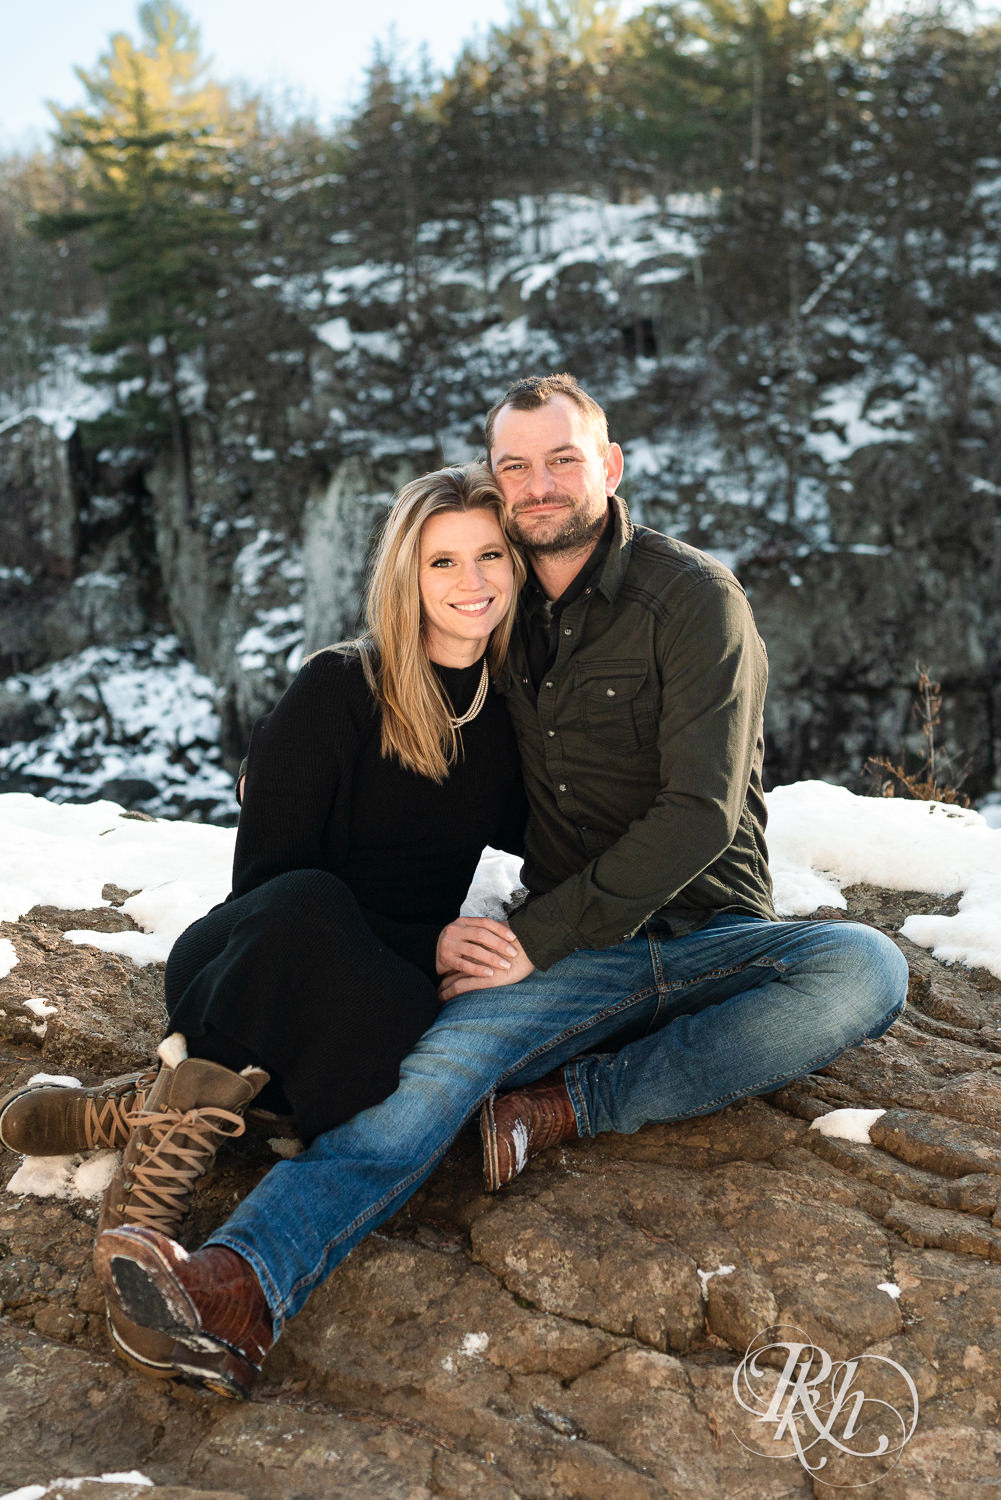 Man in jeans and woman in black dress smile on a rock at sunrise during Taylor's Falls engagement photography session.